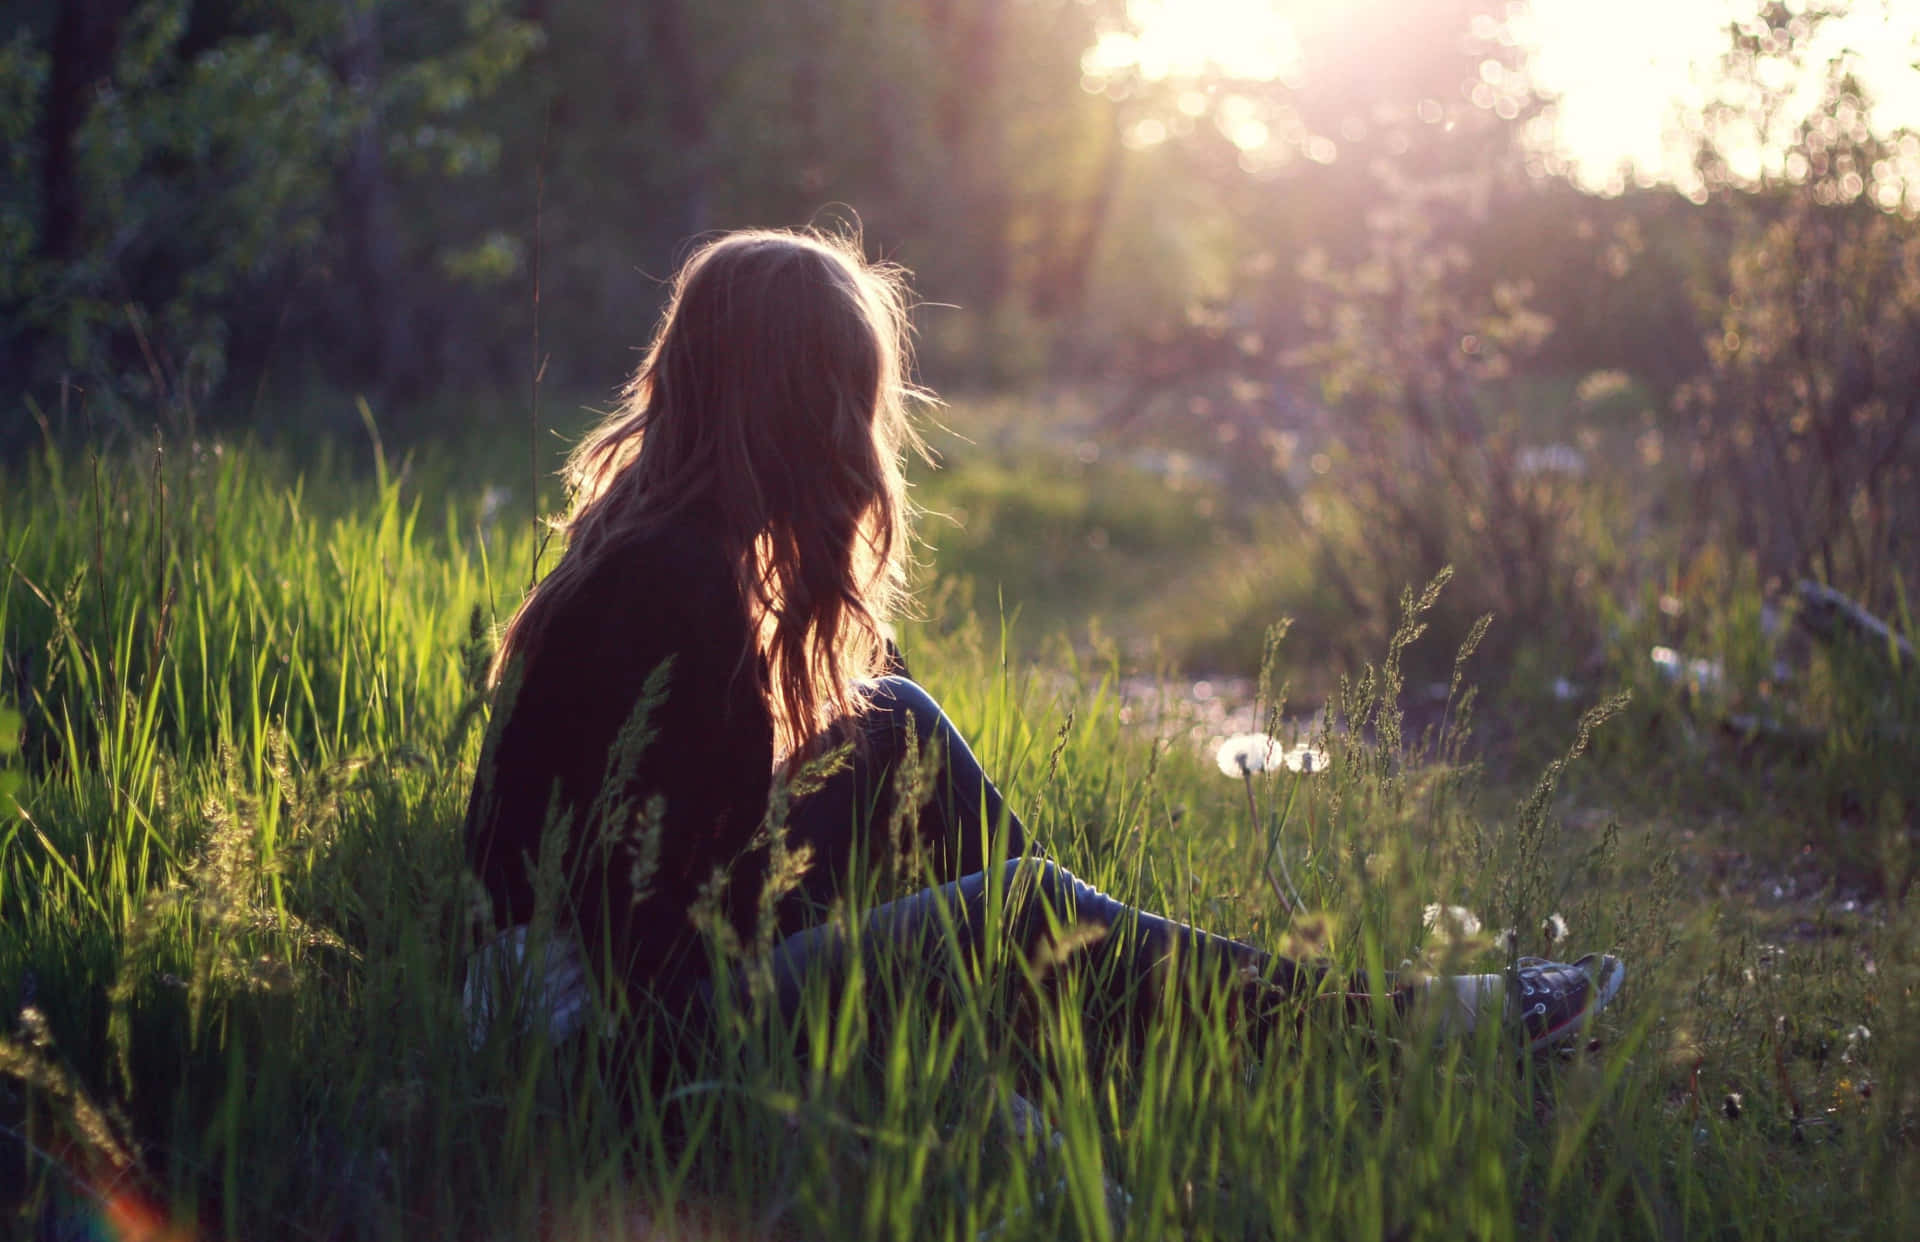 A Girl Sitting In The Grass At Sunset